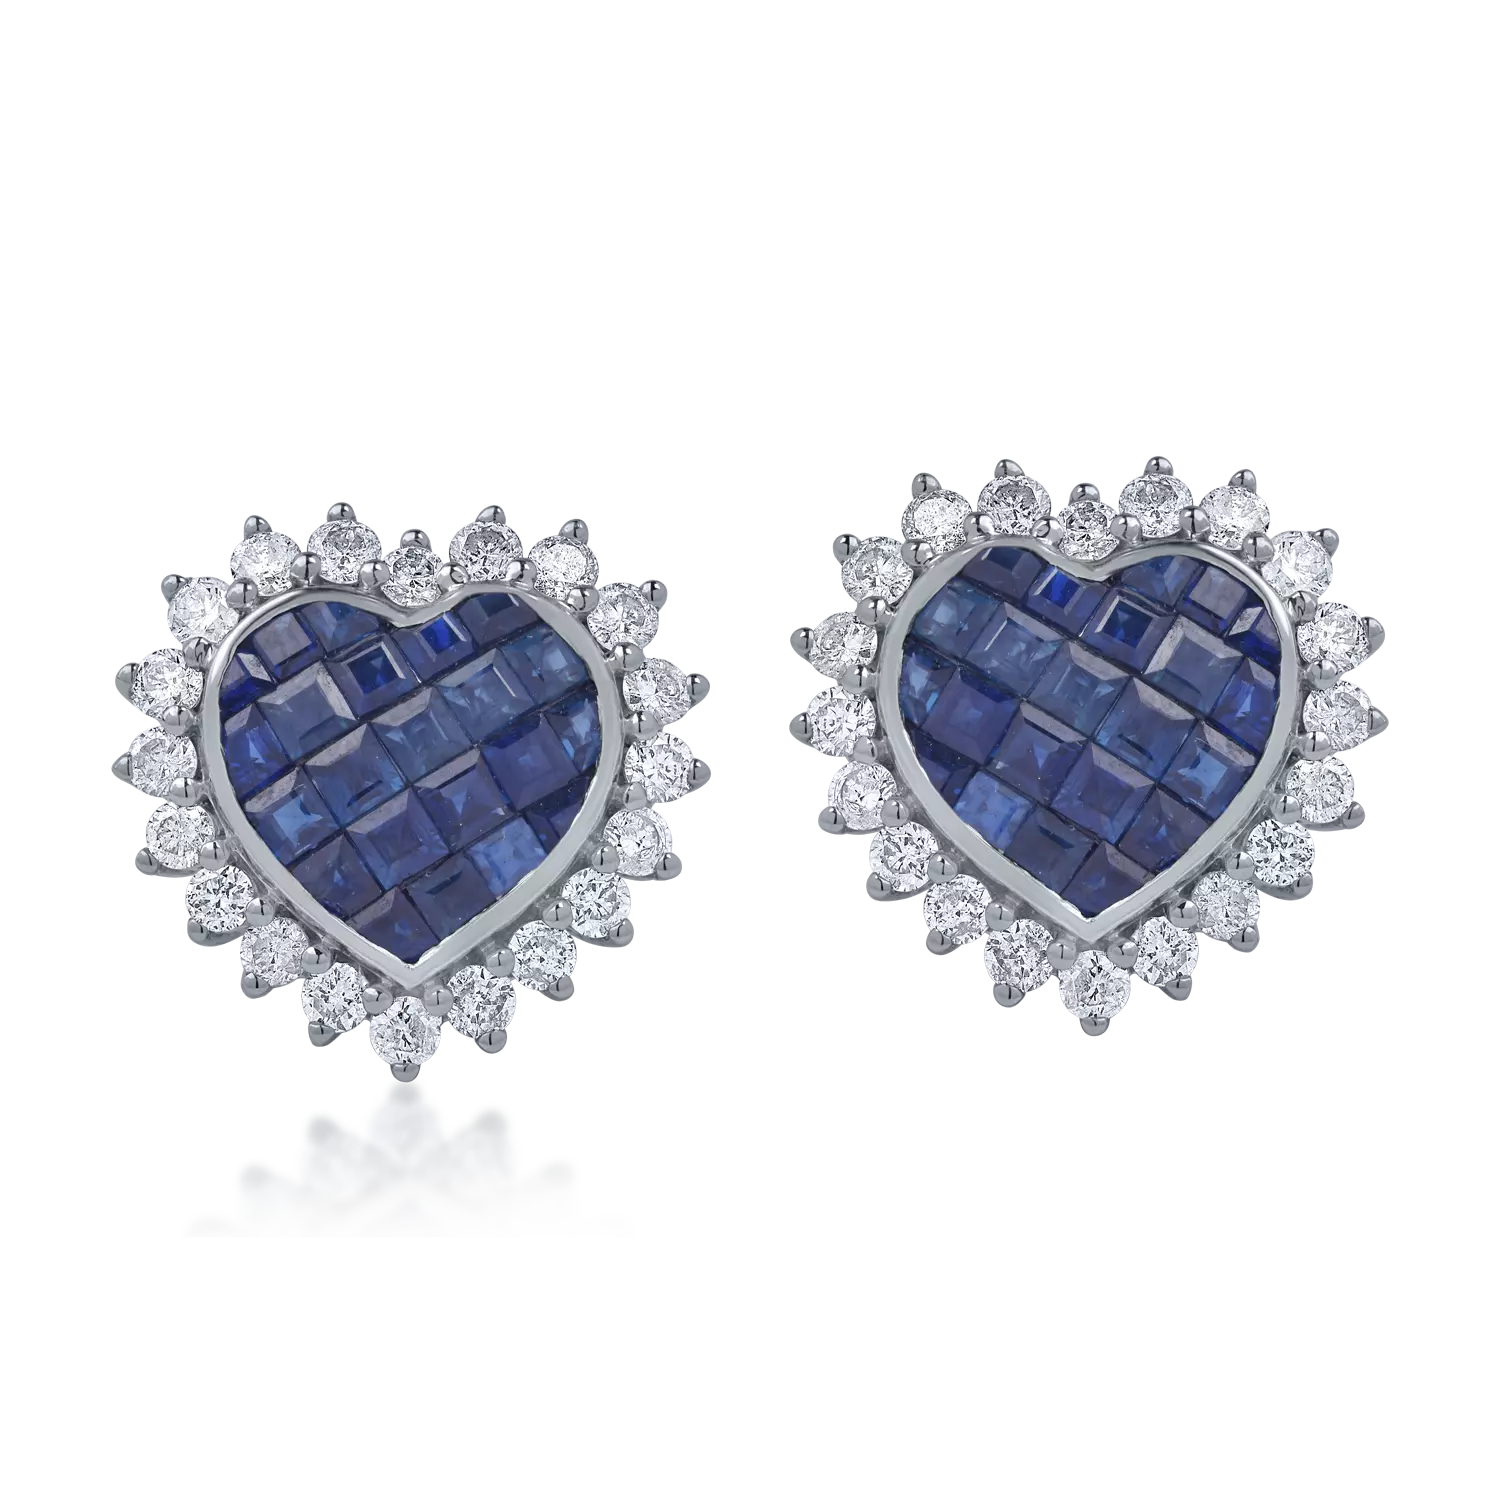 White gold heart earrings with 2.56ct sapphires and 1.15ct diamonds